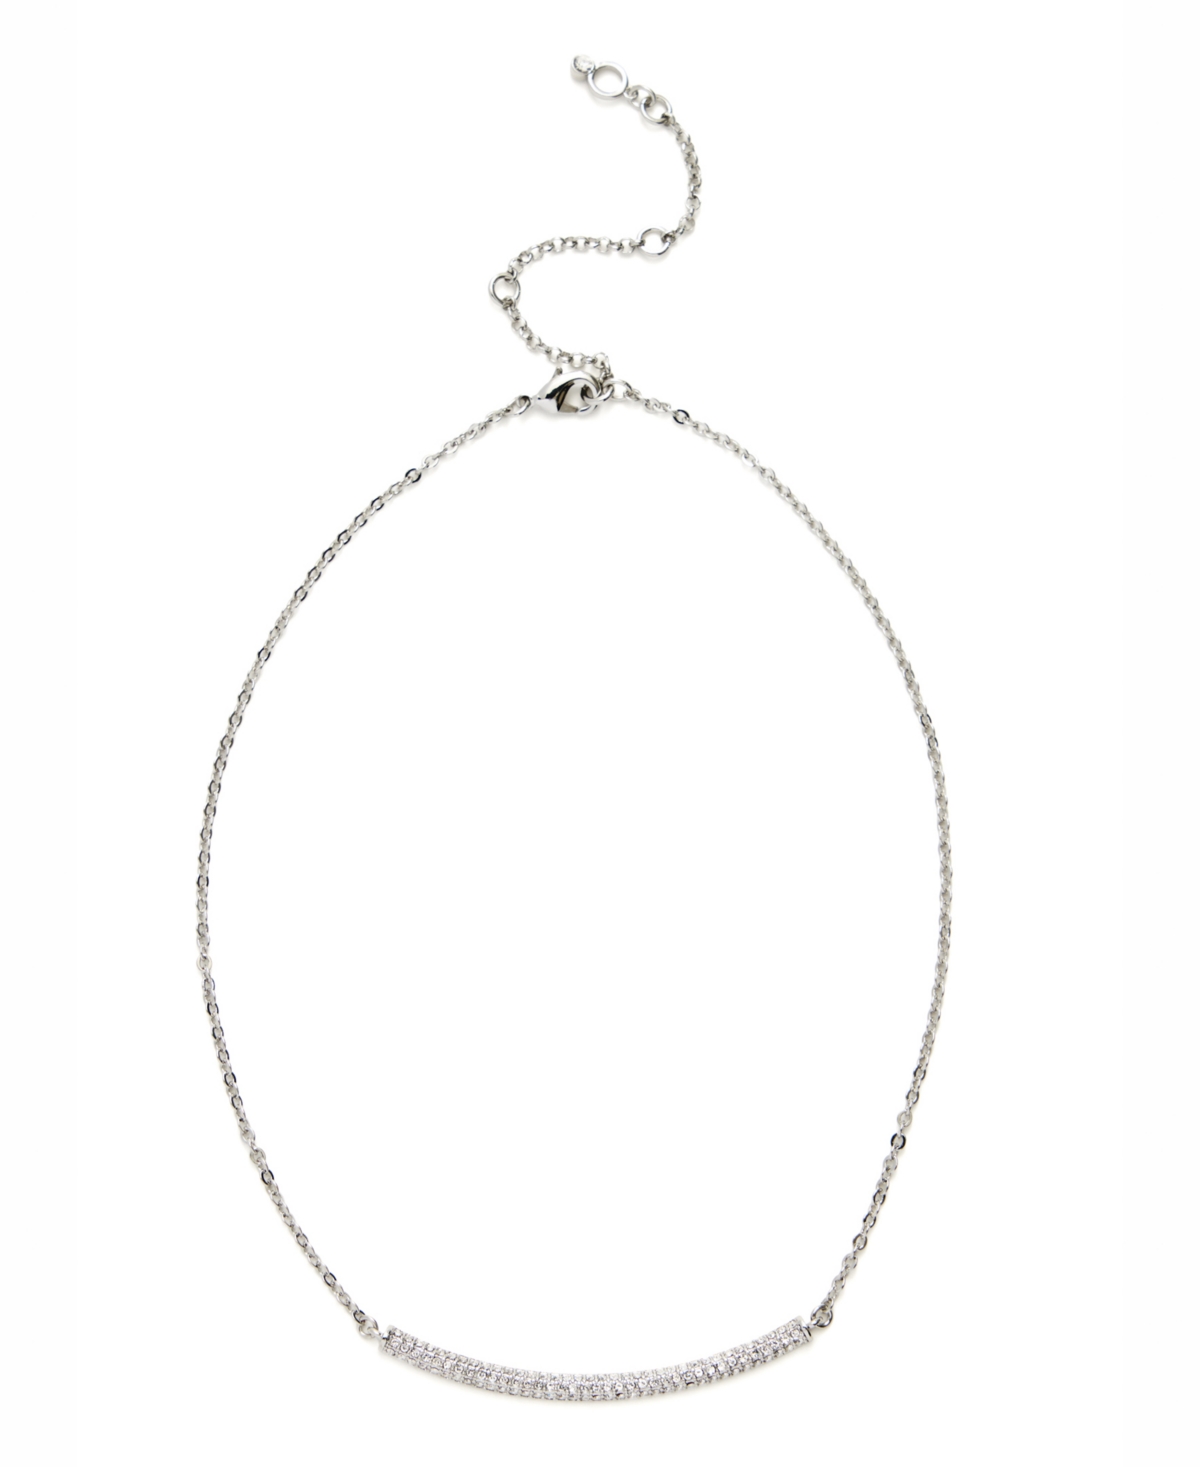 Faux Stone Pave Bar Delicate Necklace - Crystal, Rhodium